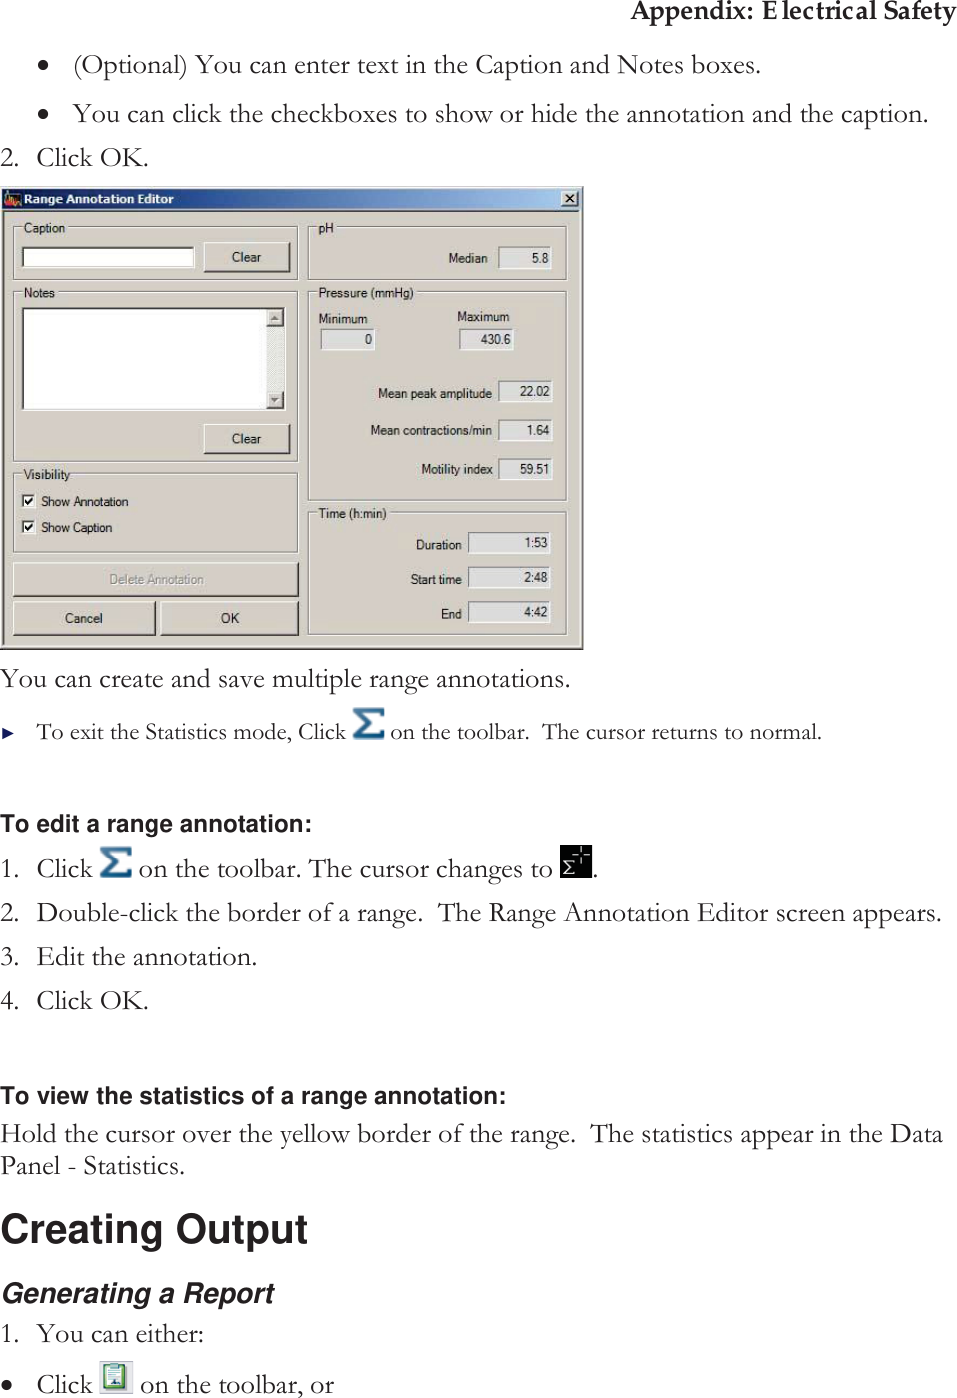 Appendix: Electrical Safety x(Optional) You can enter text in the Caption and Notes boxes. xYou can click the checkboxes to show or hide the annotation and the caption. 2. Click OK.  You can create and save multiple range annotations. ►To exit the Statistics mode, Click   on the toolbar.  The cursor returns to normal.  To edit a range annotation: 1. Click   on the toolbar. The cursor changes to  . 2. Double-click the border of a range.  The Range Annotation Editor screen appears. 3. Edit the annotation. 4. Click OK.  To view the statistics of a range annotation: Hold the cursor over the yellow border of the range.  The statistics appear in the Data Panel - Statistics.  Creating Output Generating a Report  1. You can either: xClick   on the toolbar, or  